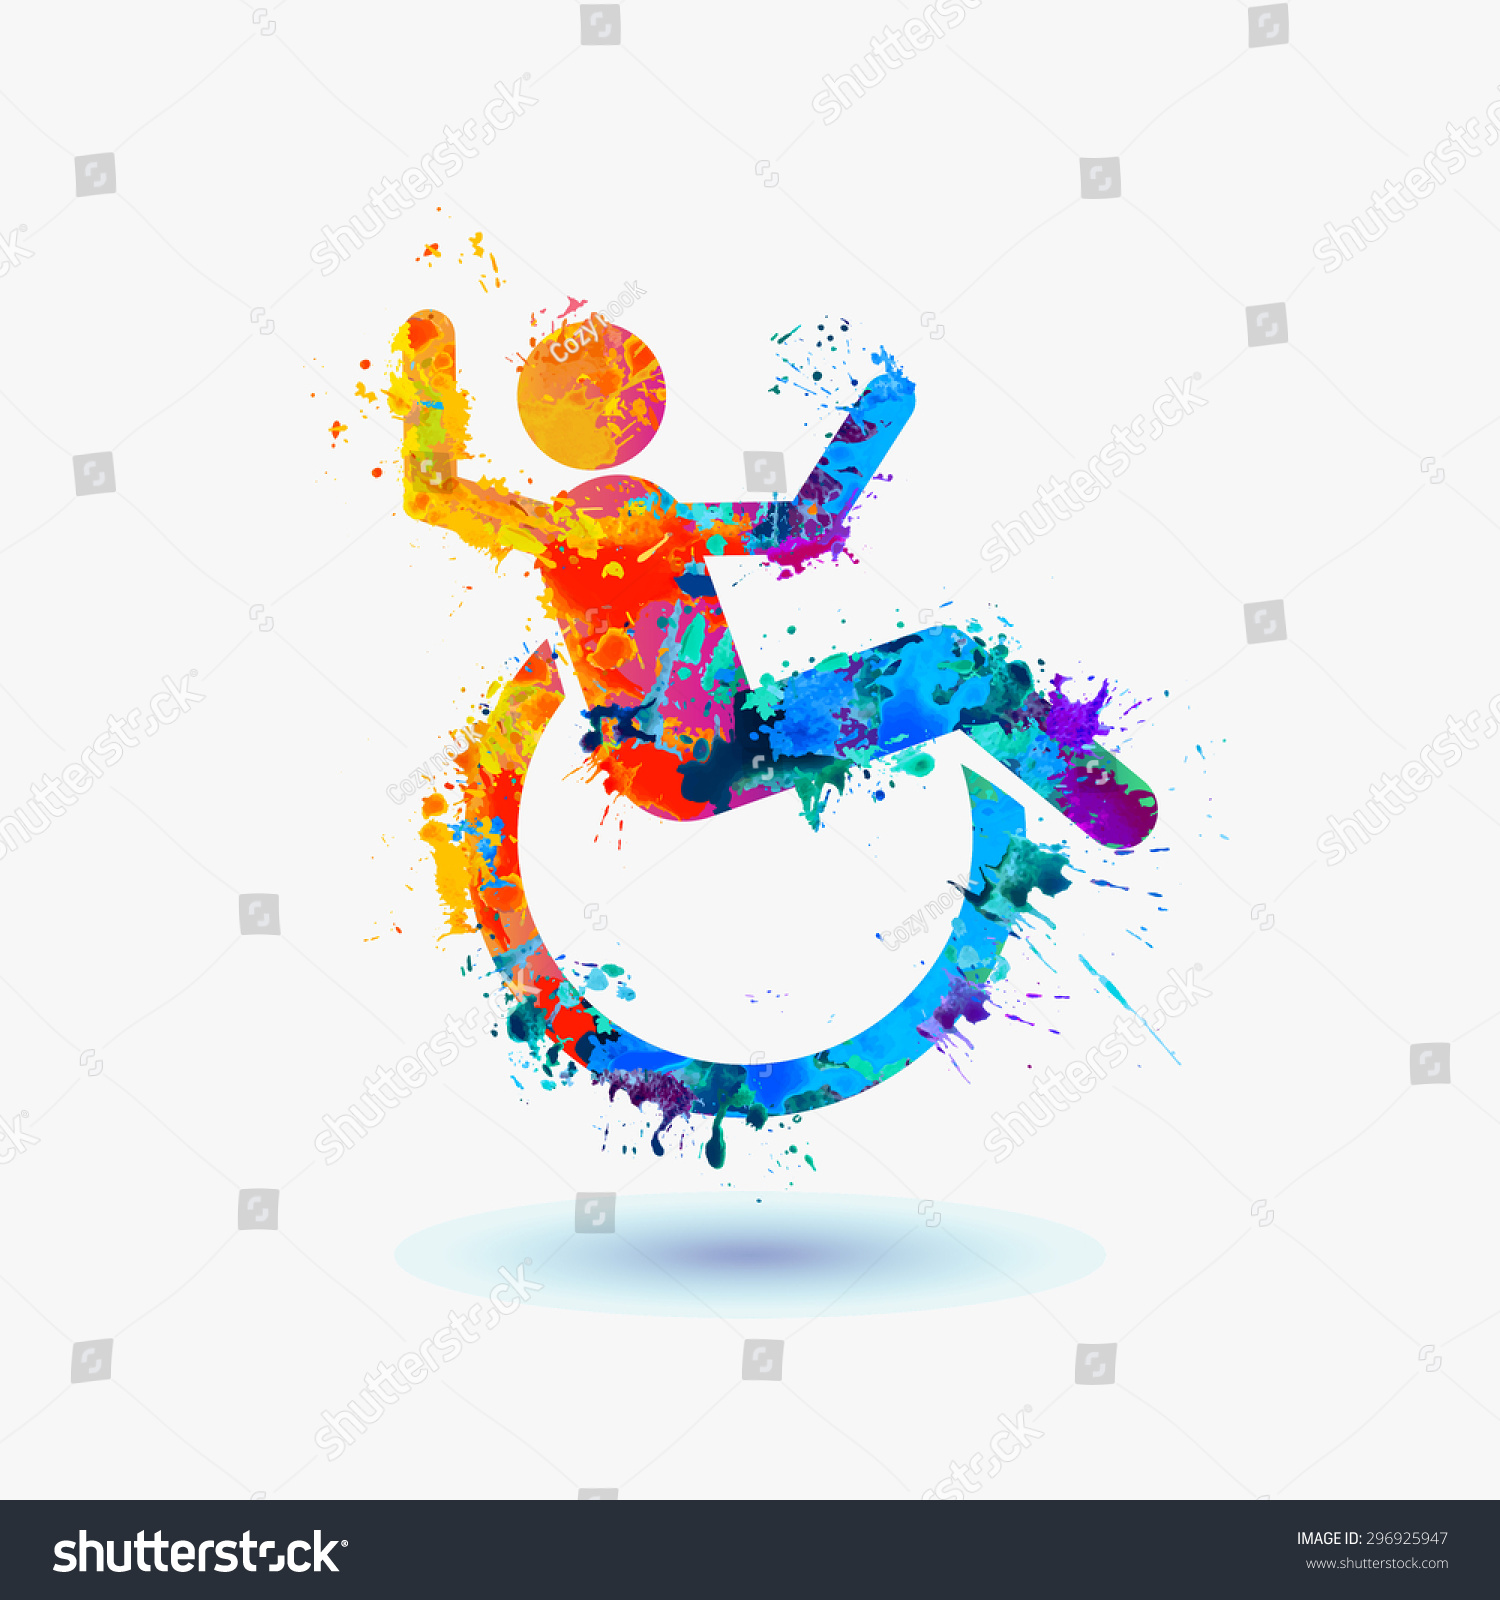 stock-vector-happy-disabled-people-life-asserting-watercolor-sign-vector-296925947.jpg